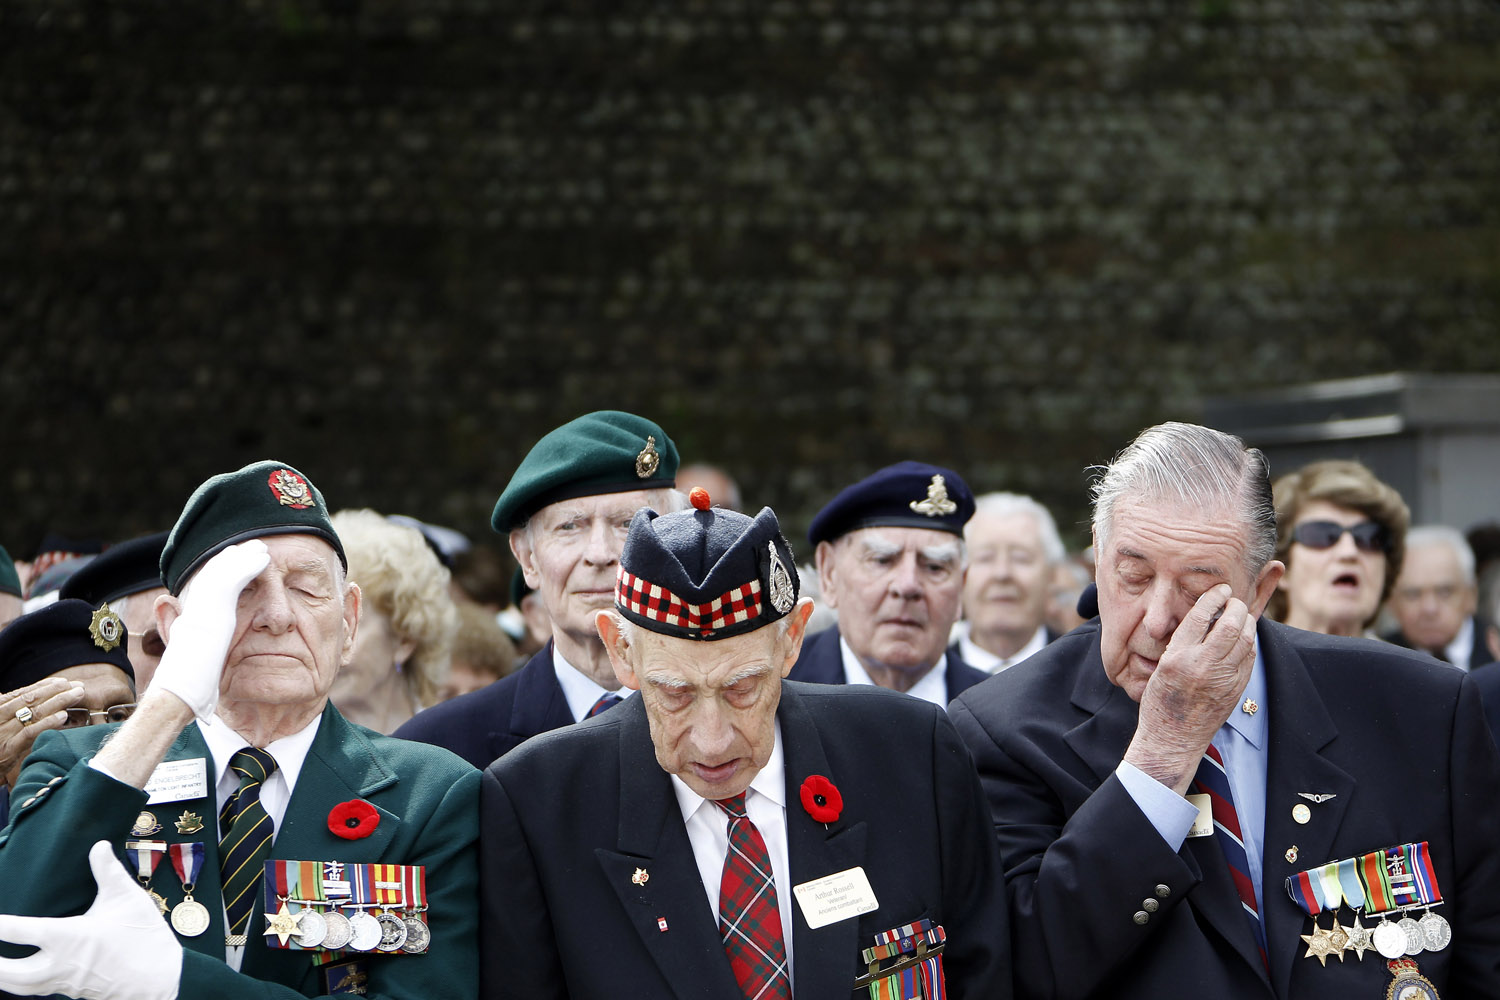 Aug. 19, 2012. Canadian veterans take part in the 70th anniversary ceremony of the Dieppe Raid in Dieppe, northwestern France, in memory of the Second World War Allied attack on the German-occupied port of Dieppe on Aug. 19, 1942.